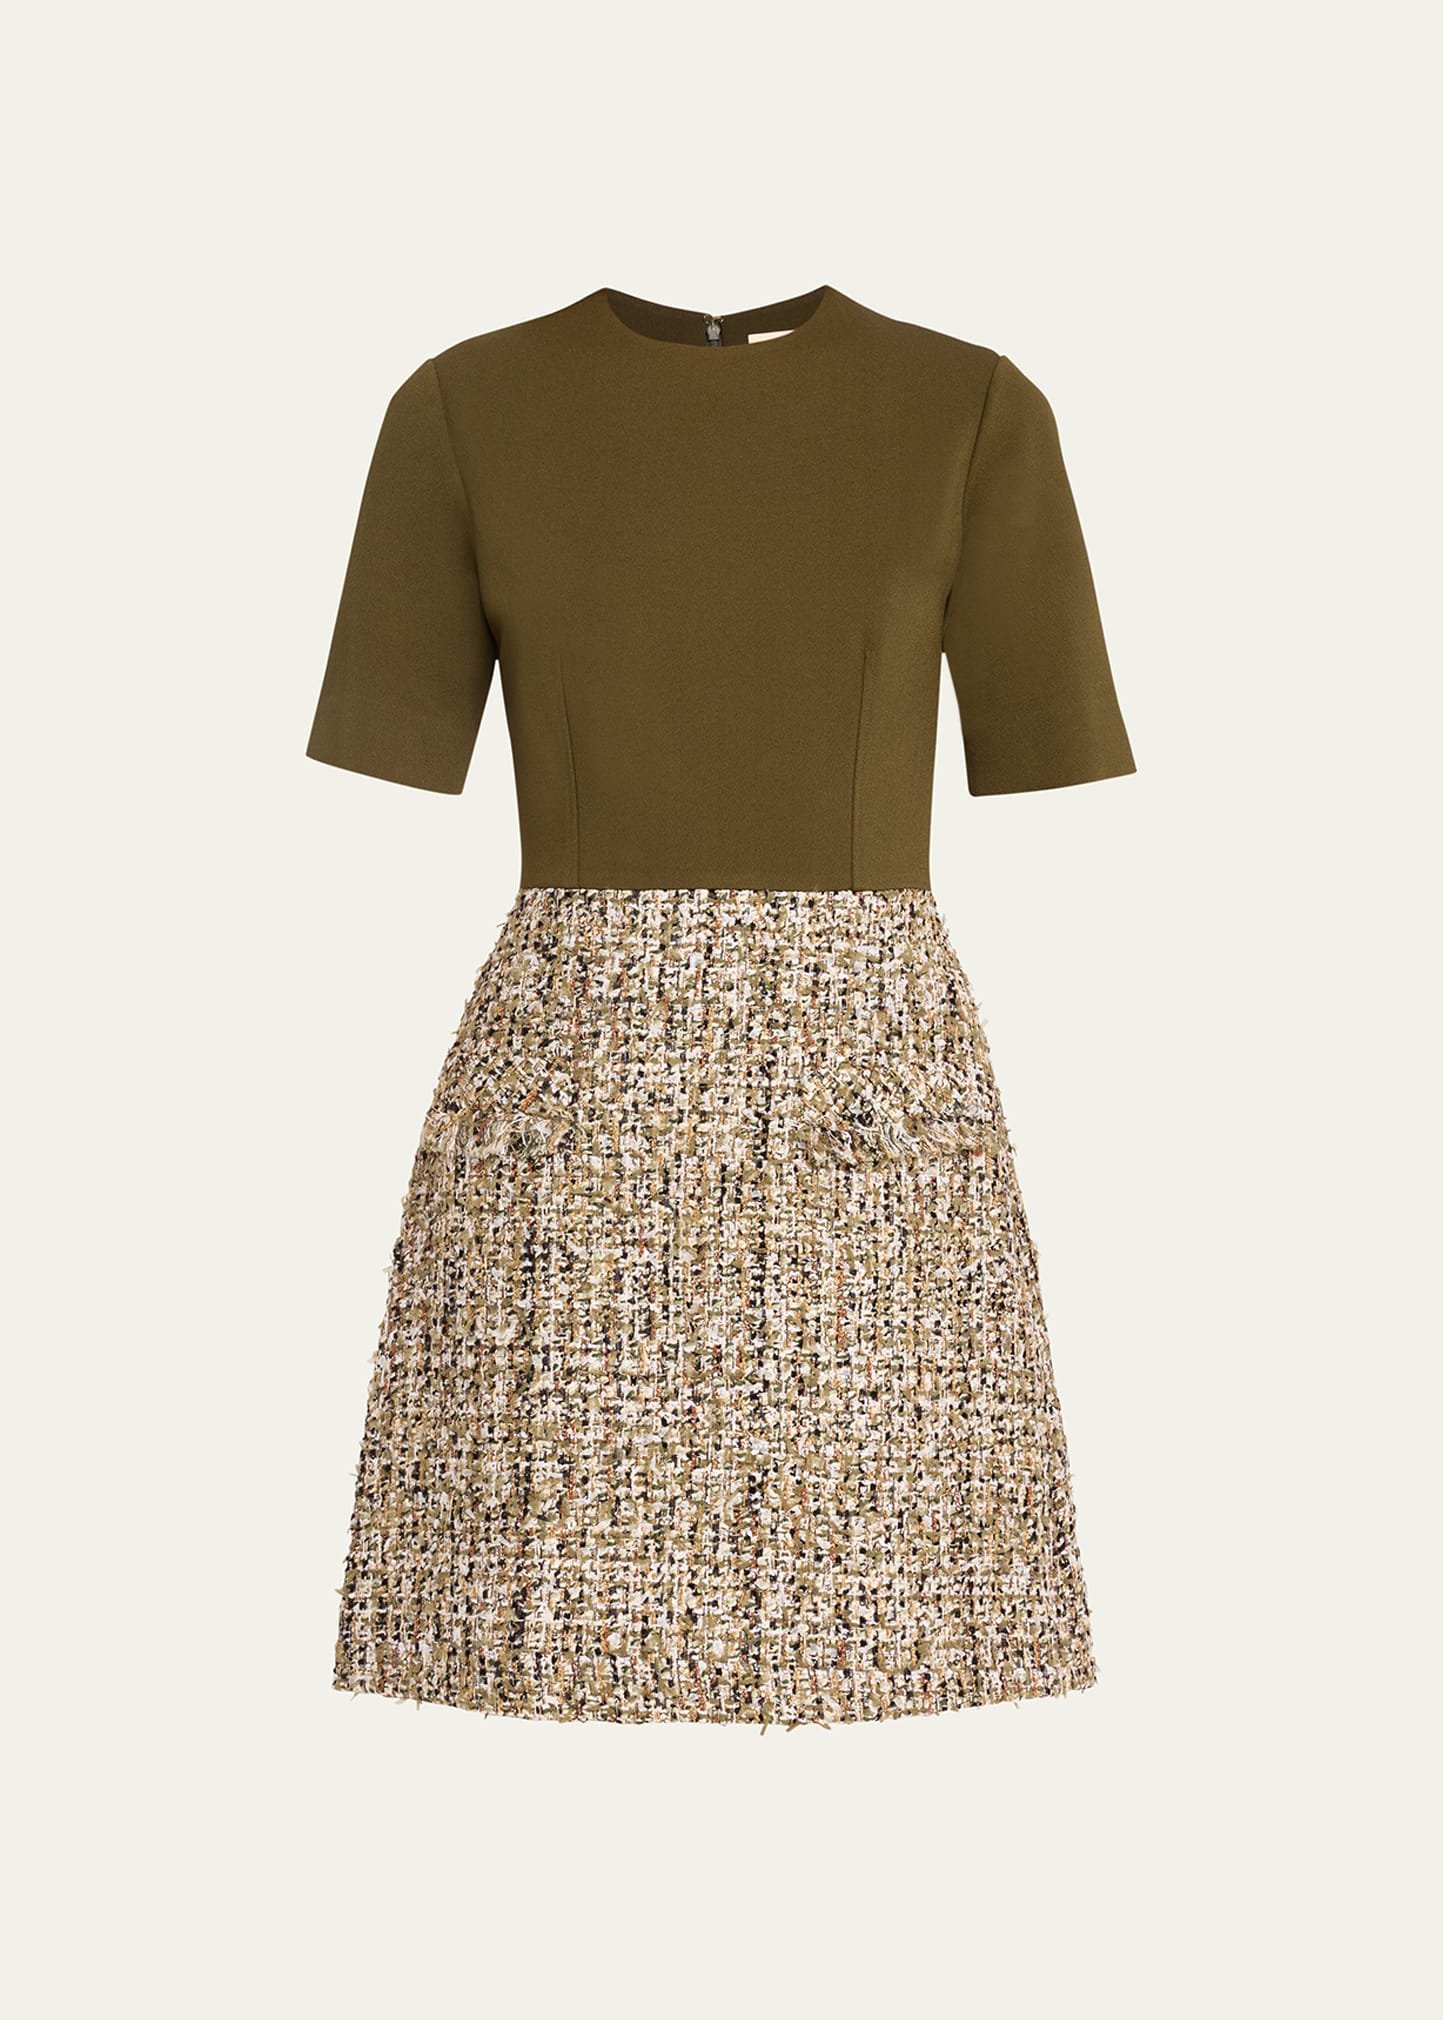 Jason Wu Collection Textured Tweed Jersey Dress In Deep Olive